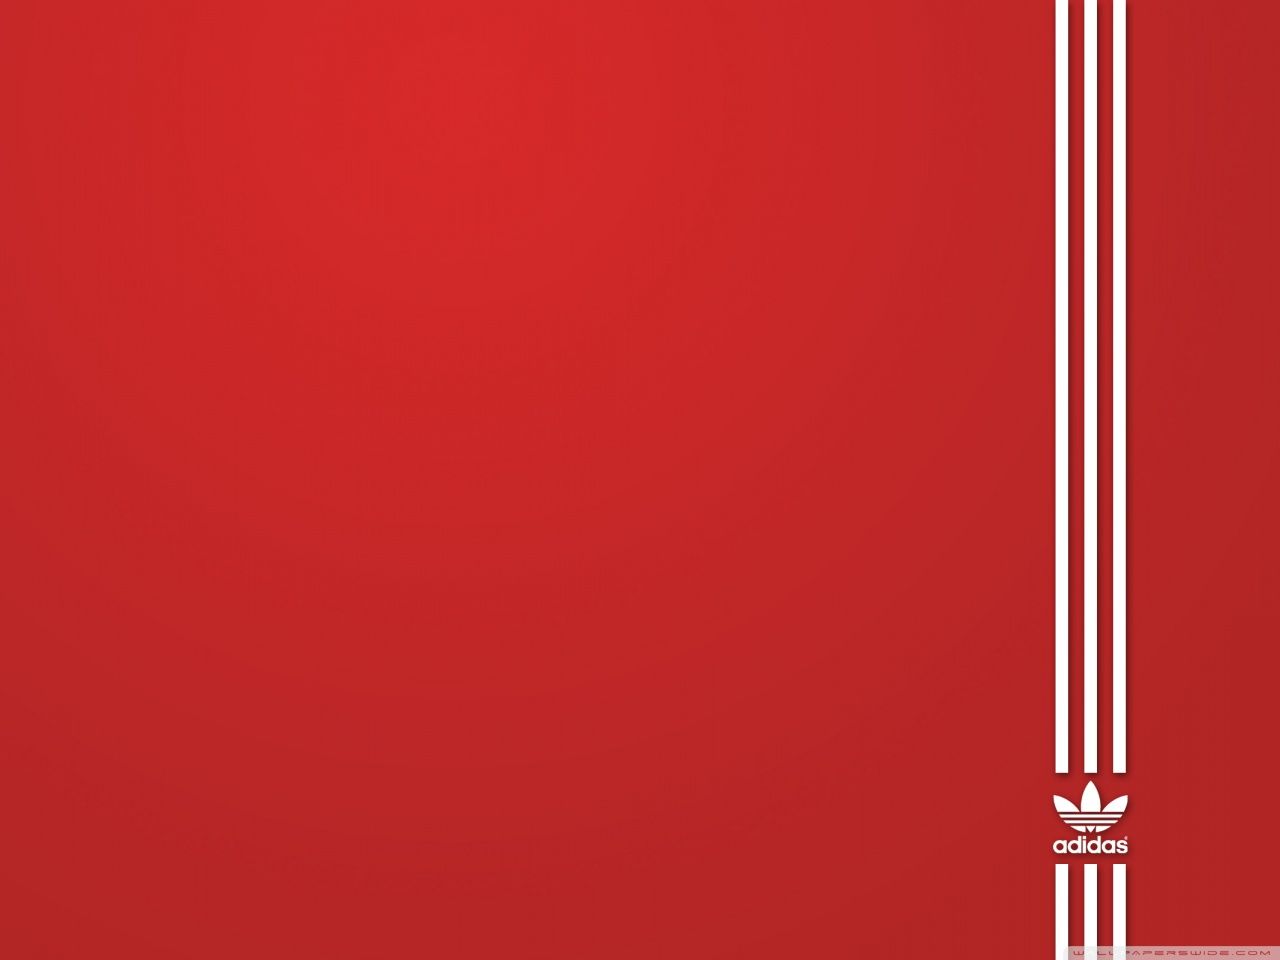 Adidas Stripes Wallpapers - 4k, HD Adidas Stripes Backgrounds on ...